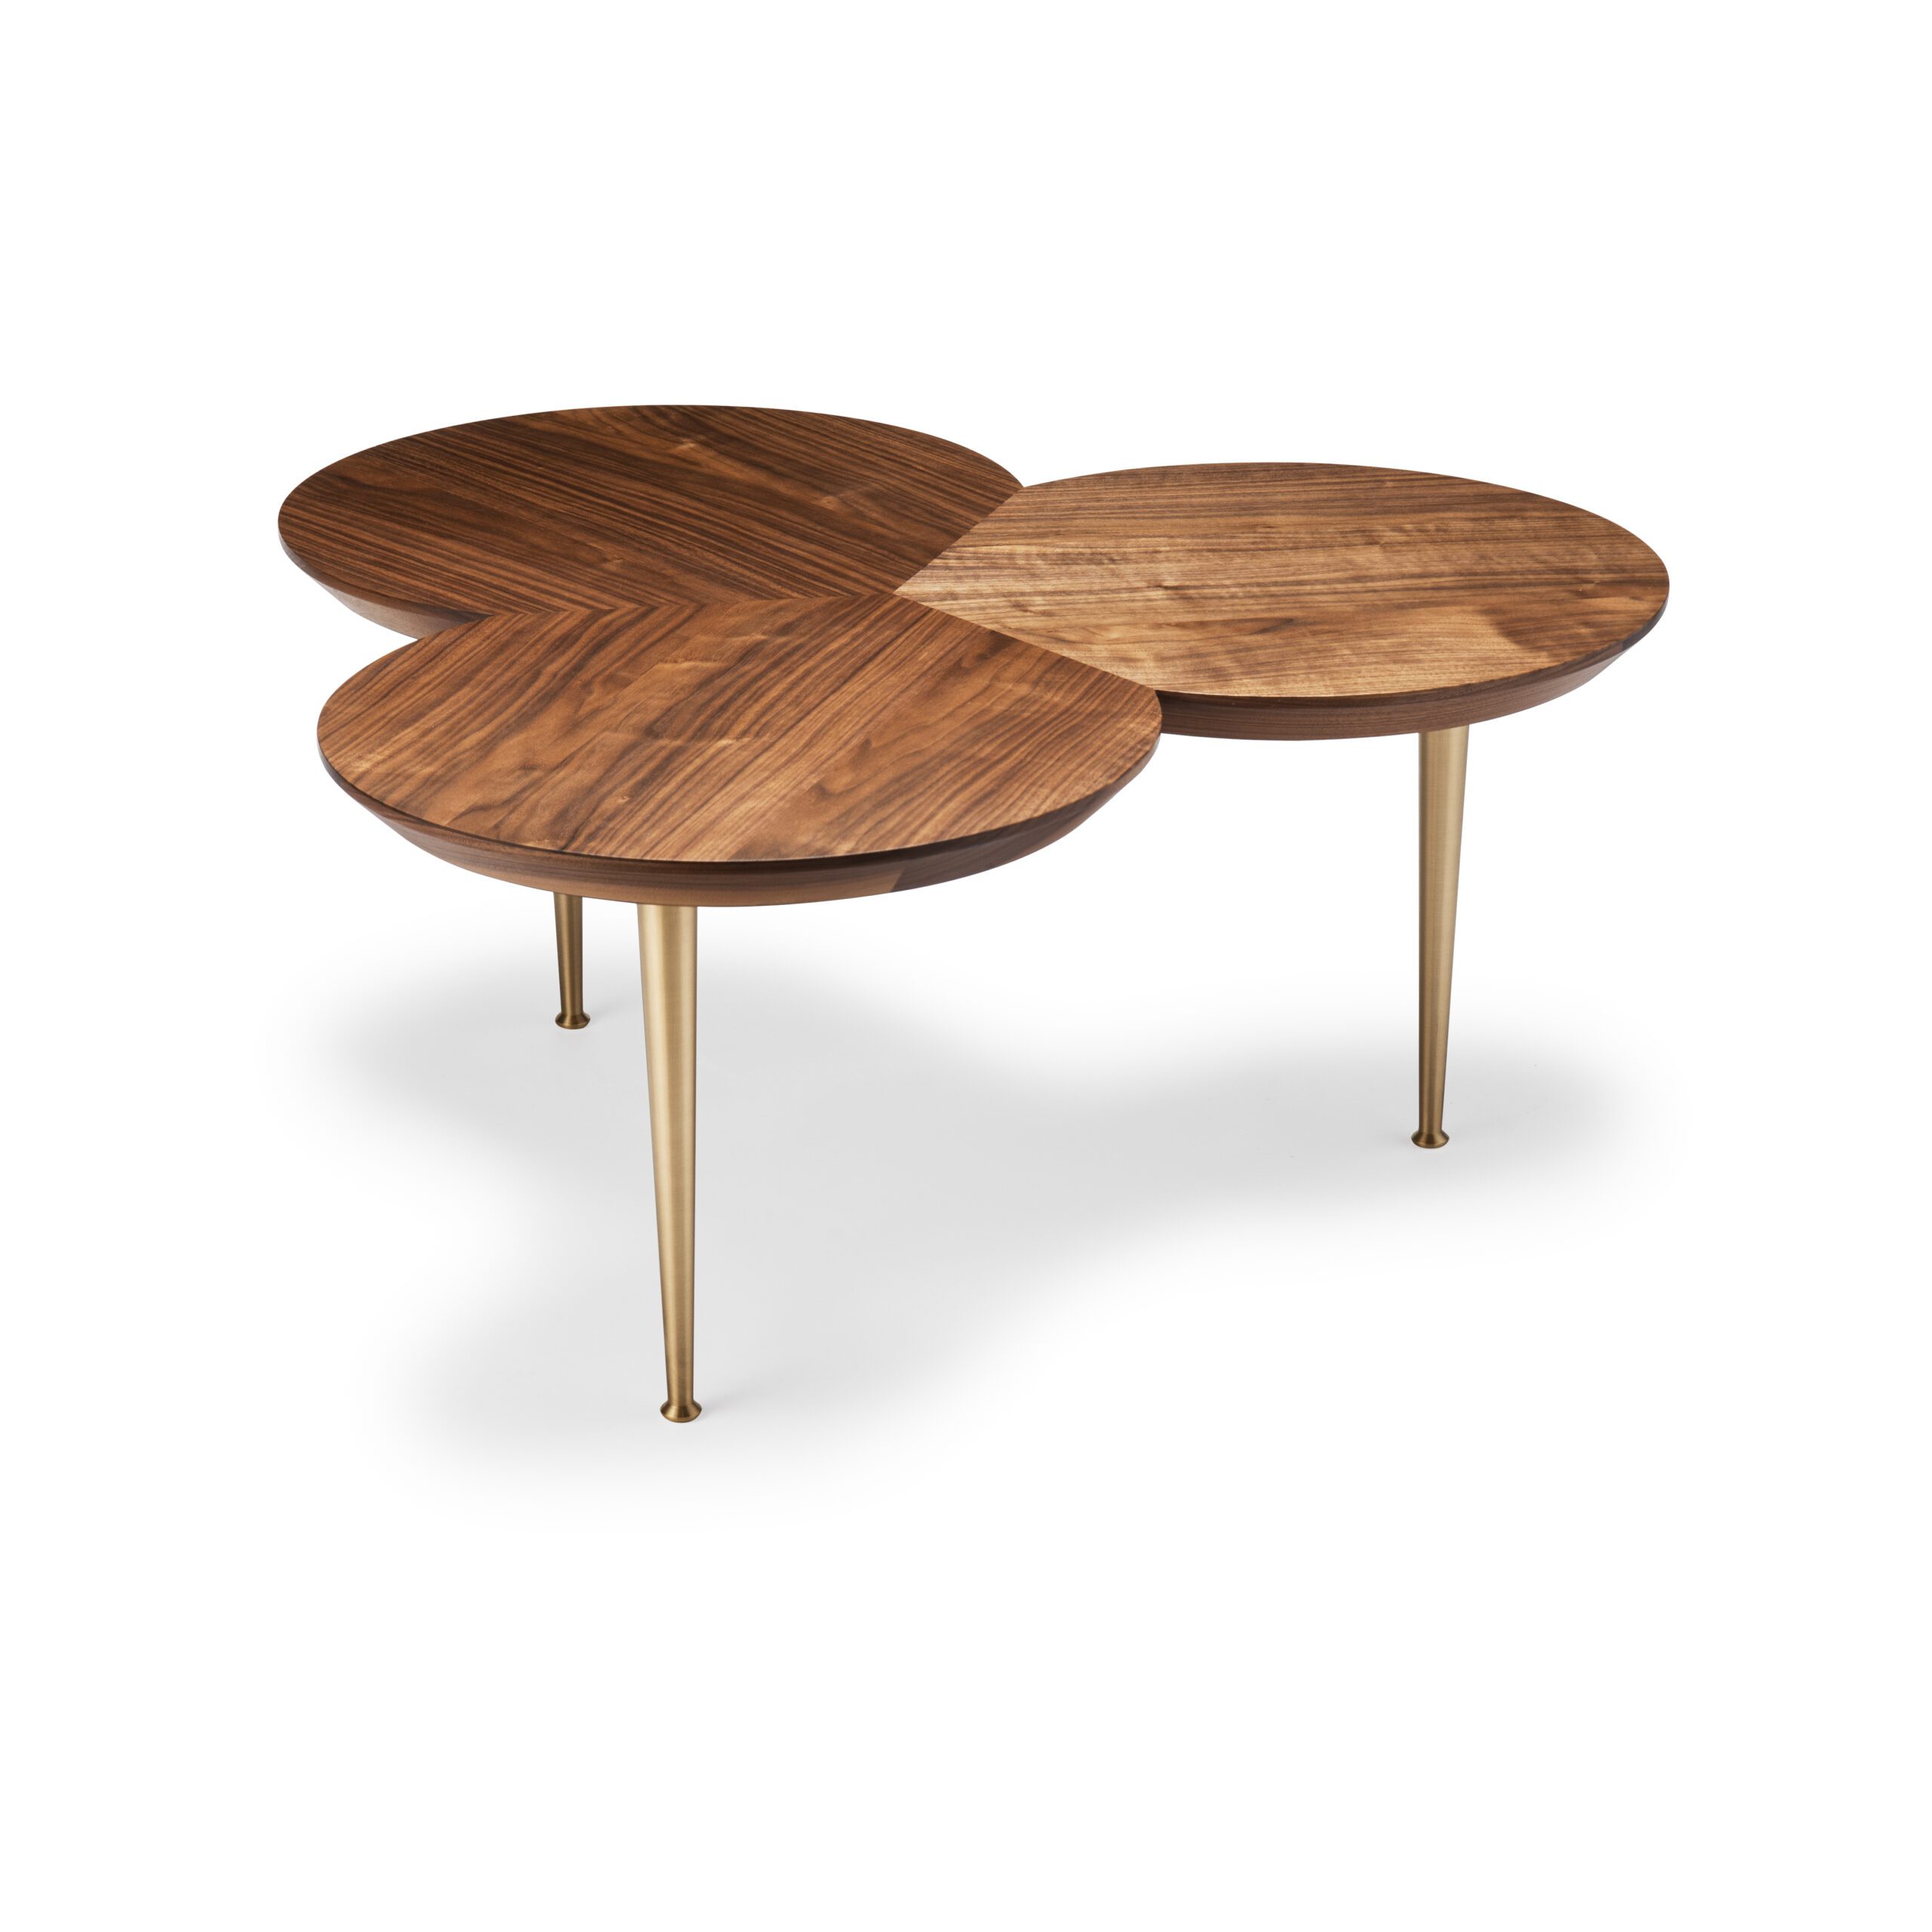 The Stem Coffee Table - Shown here in natural oiled walnut and brass. The top is made from solid and veneered timber. The legs are precision engineered from solid brass.